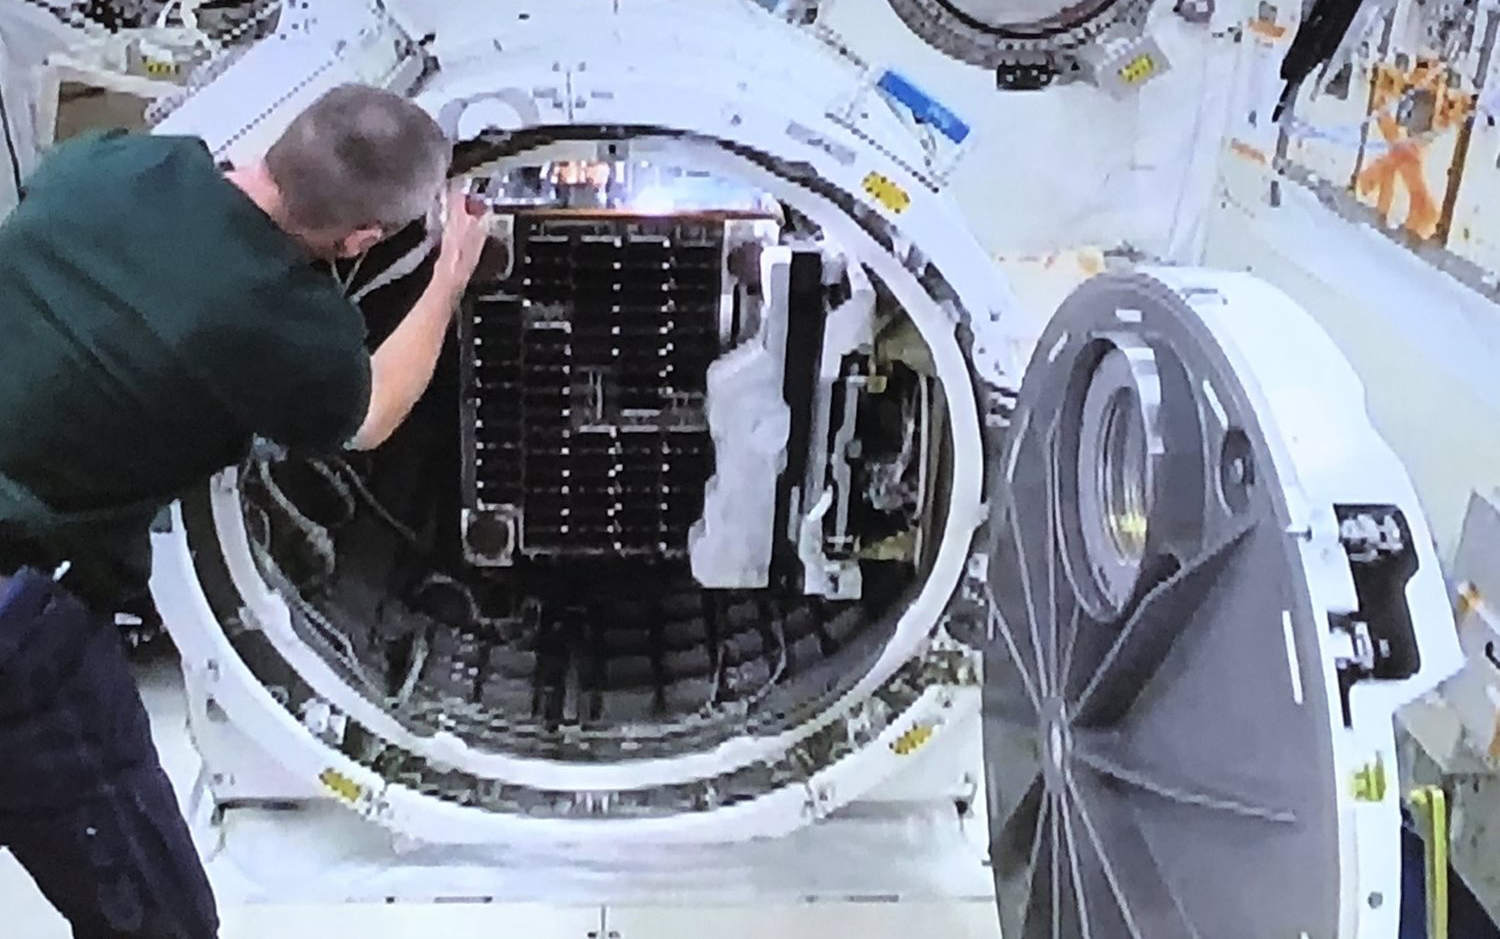 RemoveDEBRIS in Kibo airlock on the ISS